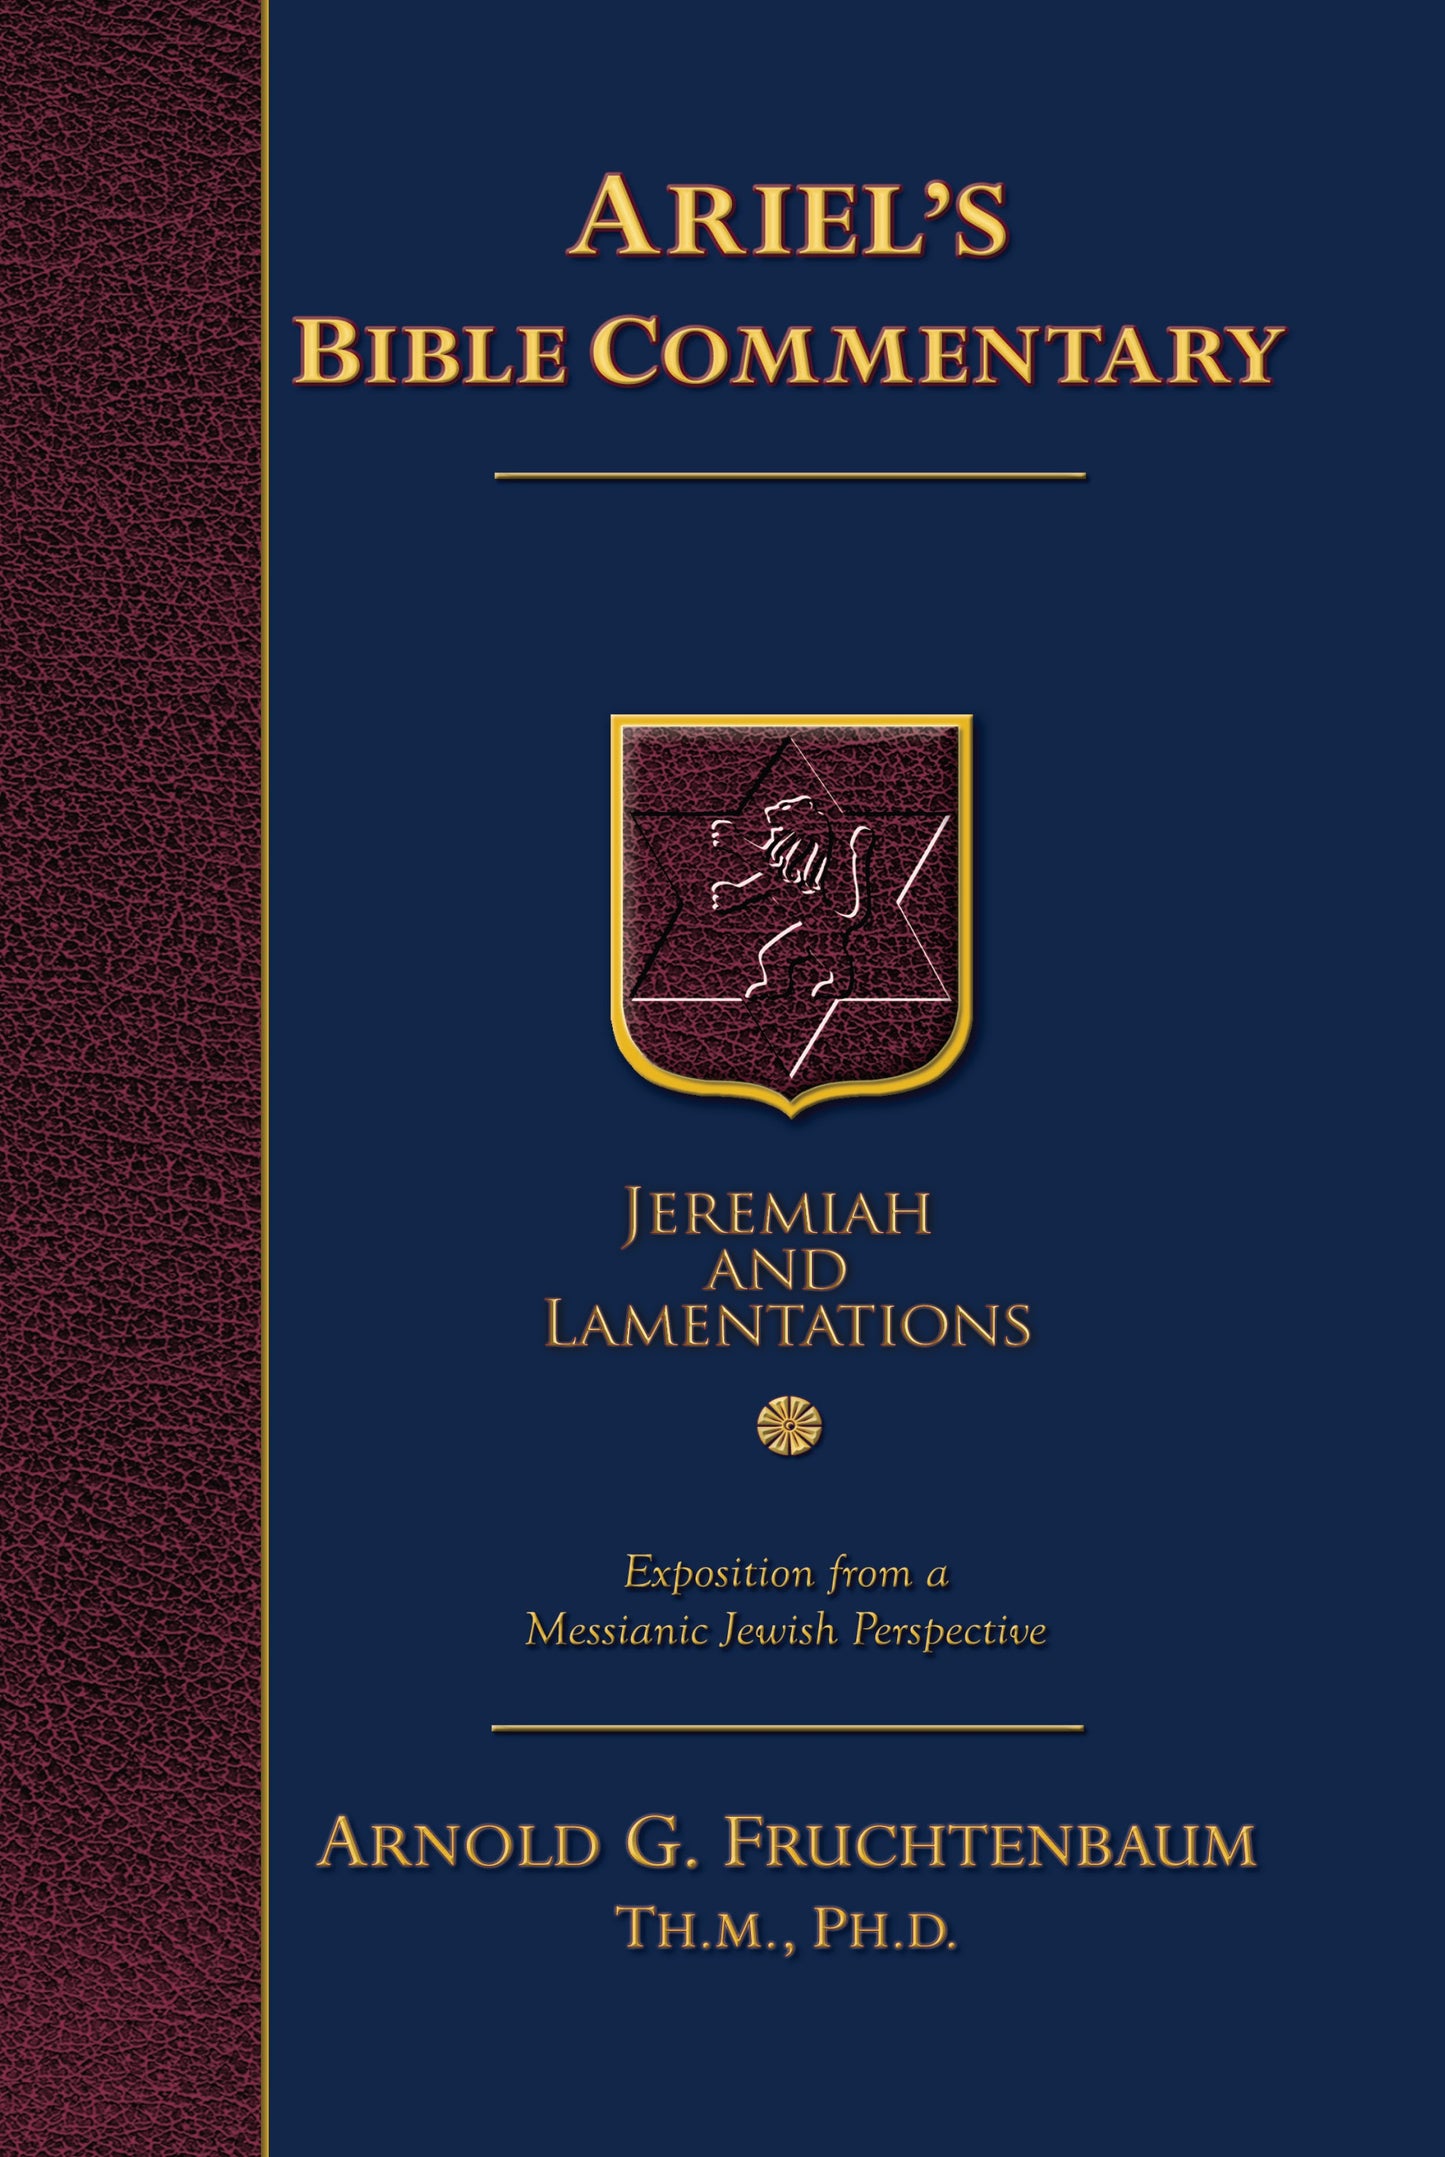 Commentary Series: Jeremiah and Lamentations